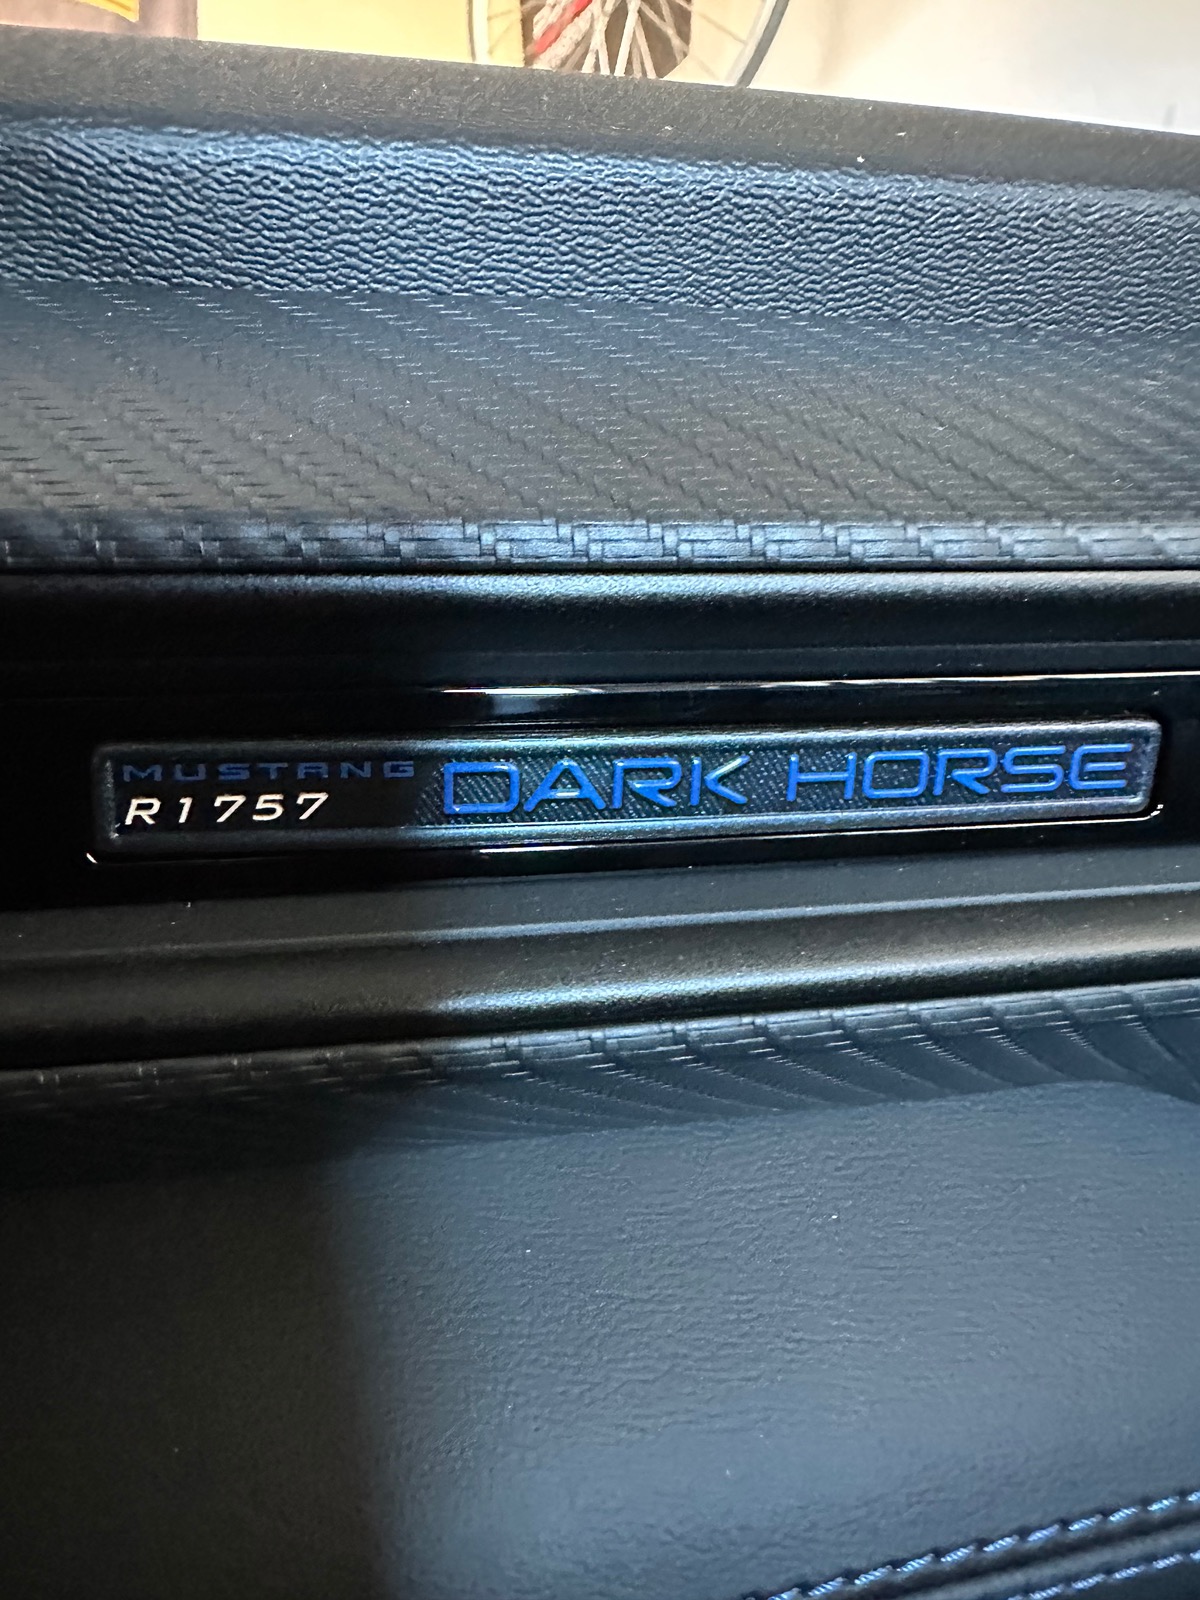 S650 Mustang Dark Horse Owners, Share your Chassis numbers IMG_7019